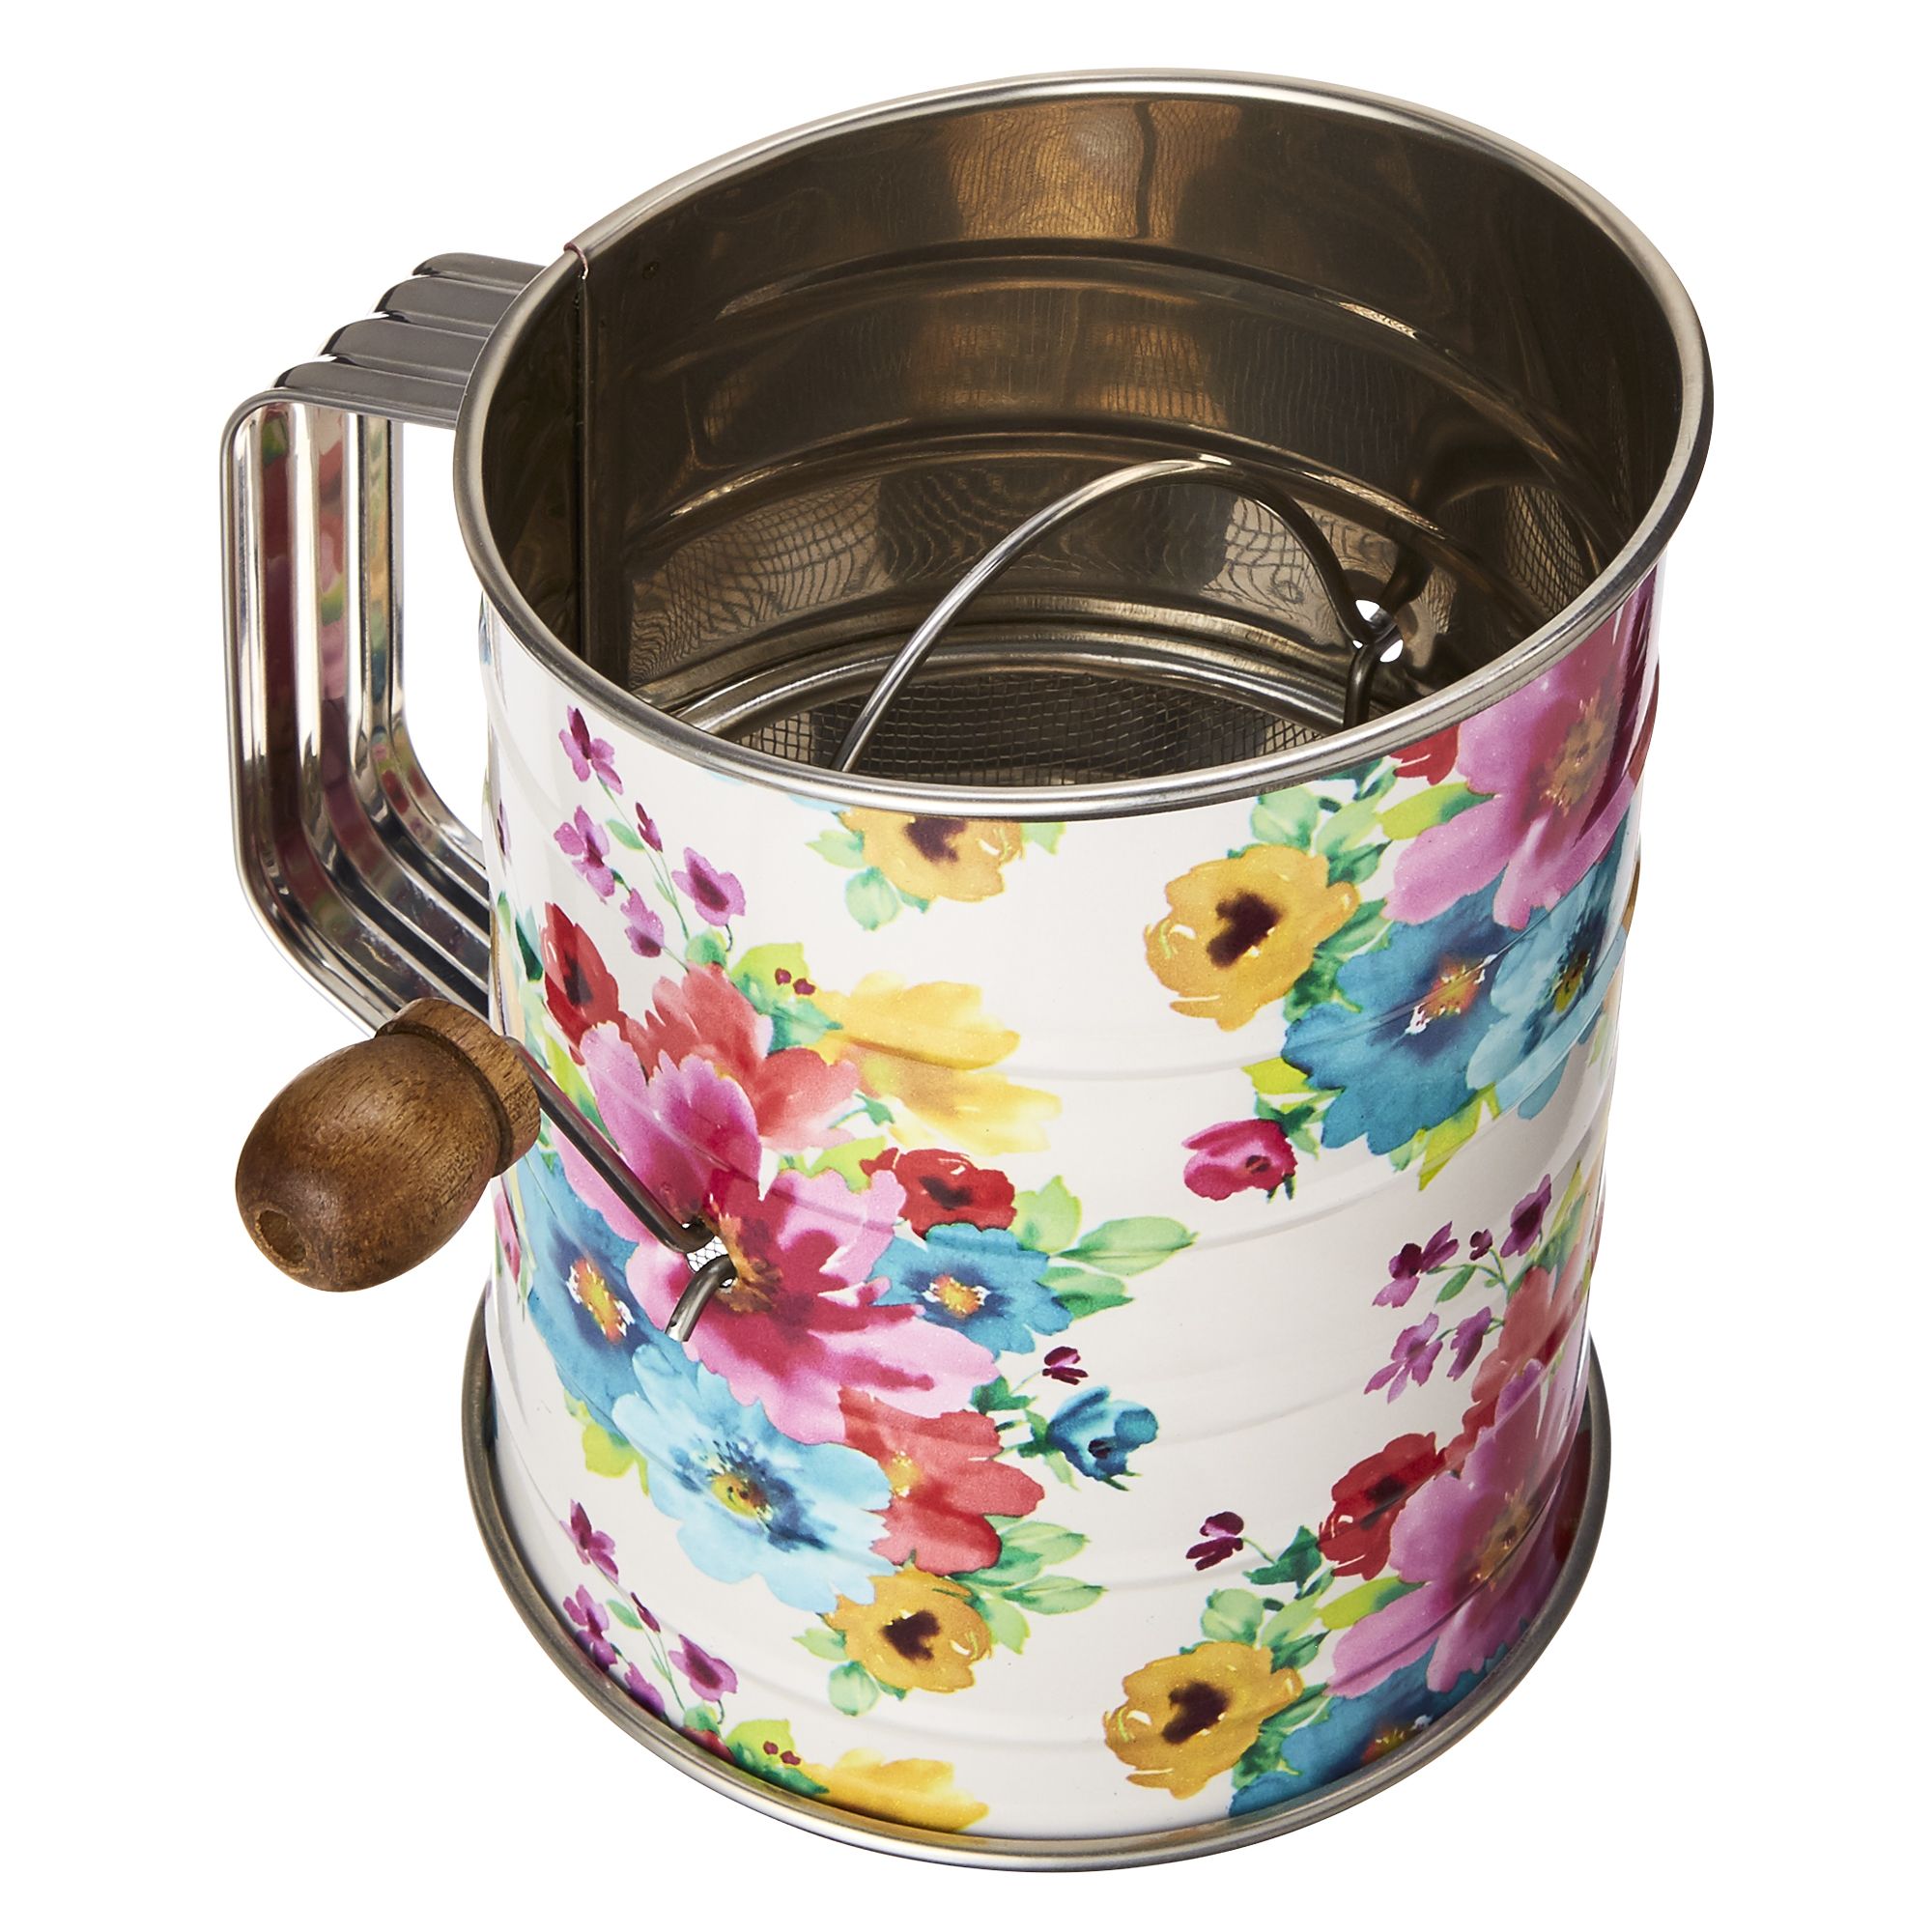 The Pioneer Woman 3-Cup Stainless Steel Flour Sifter and Pastry Cutter with Crank, Floral Design